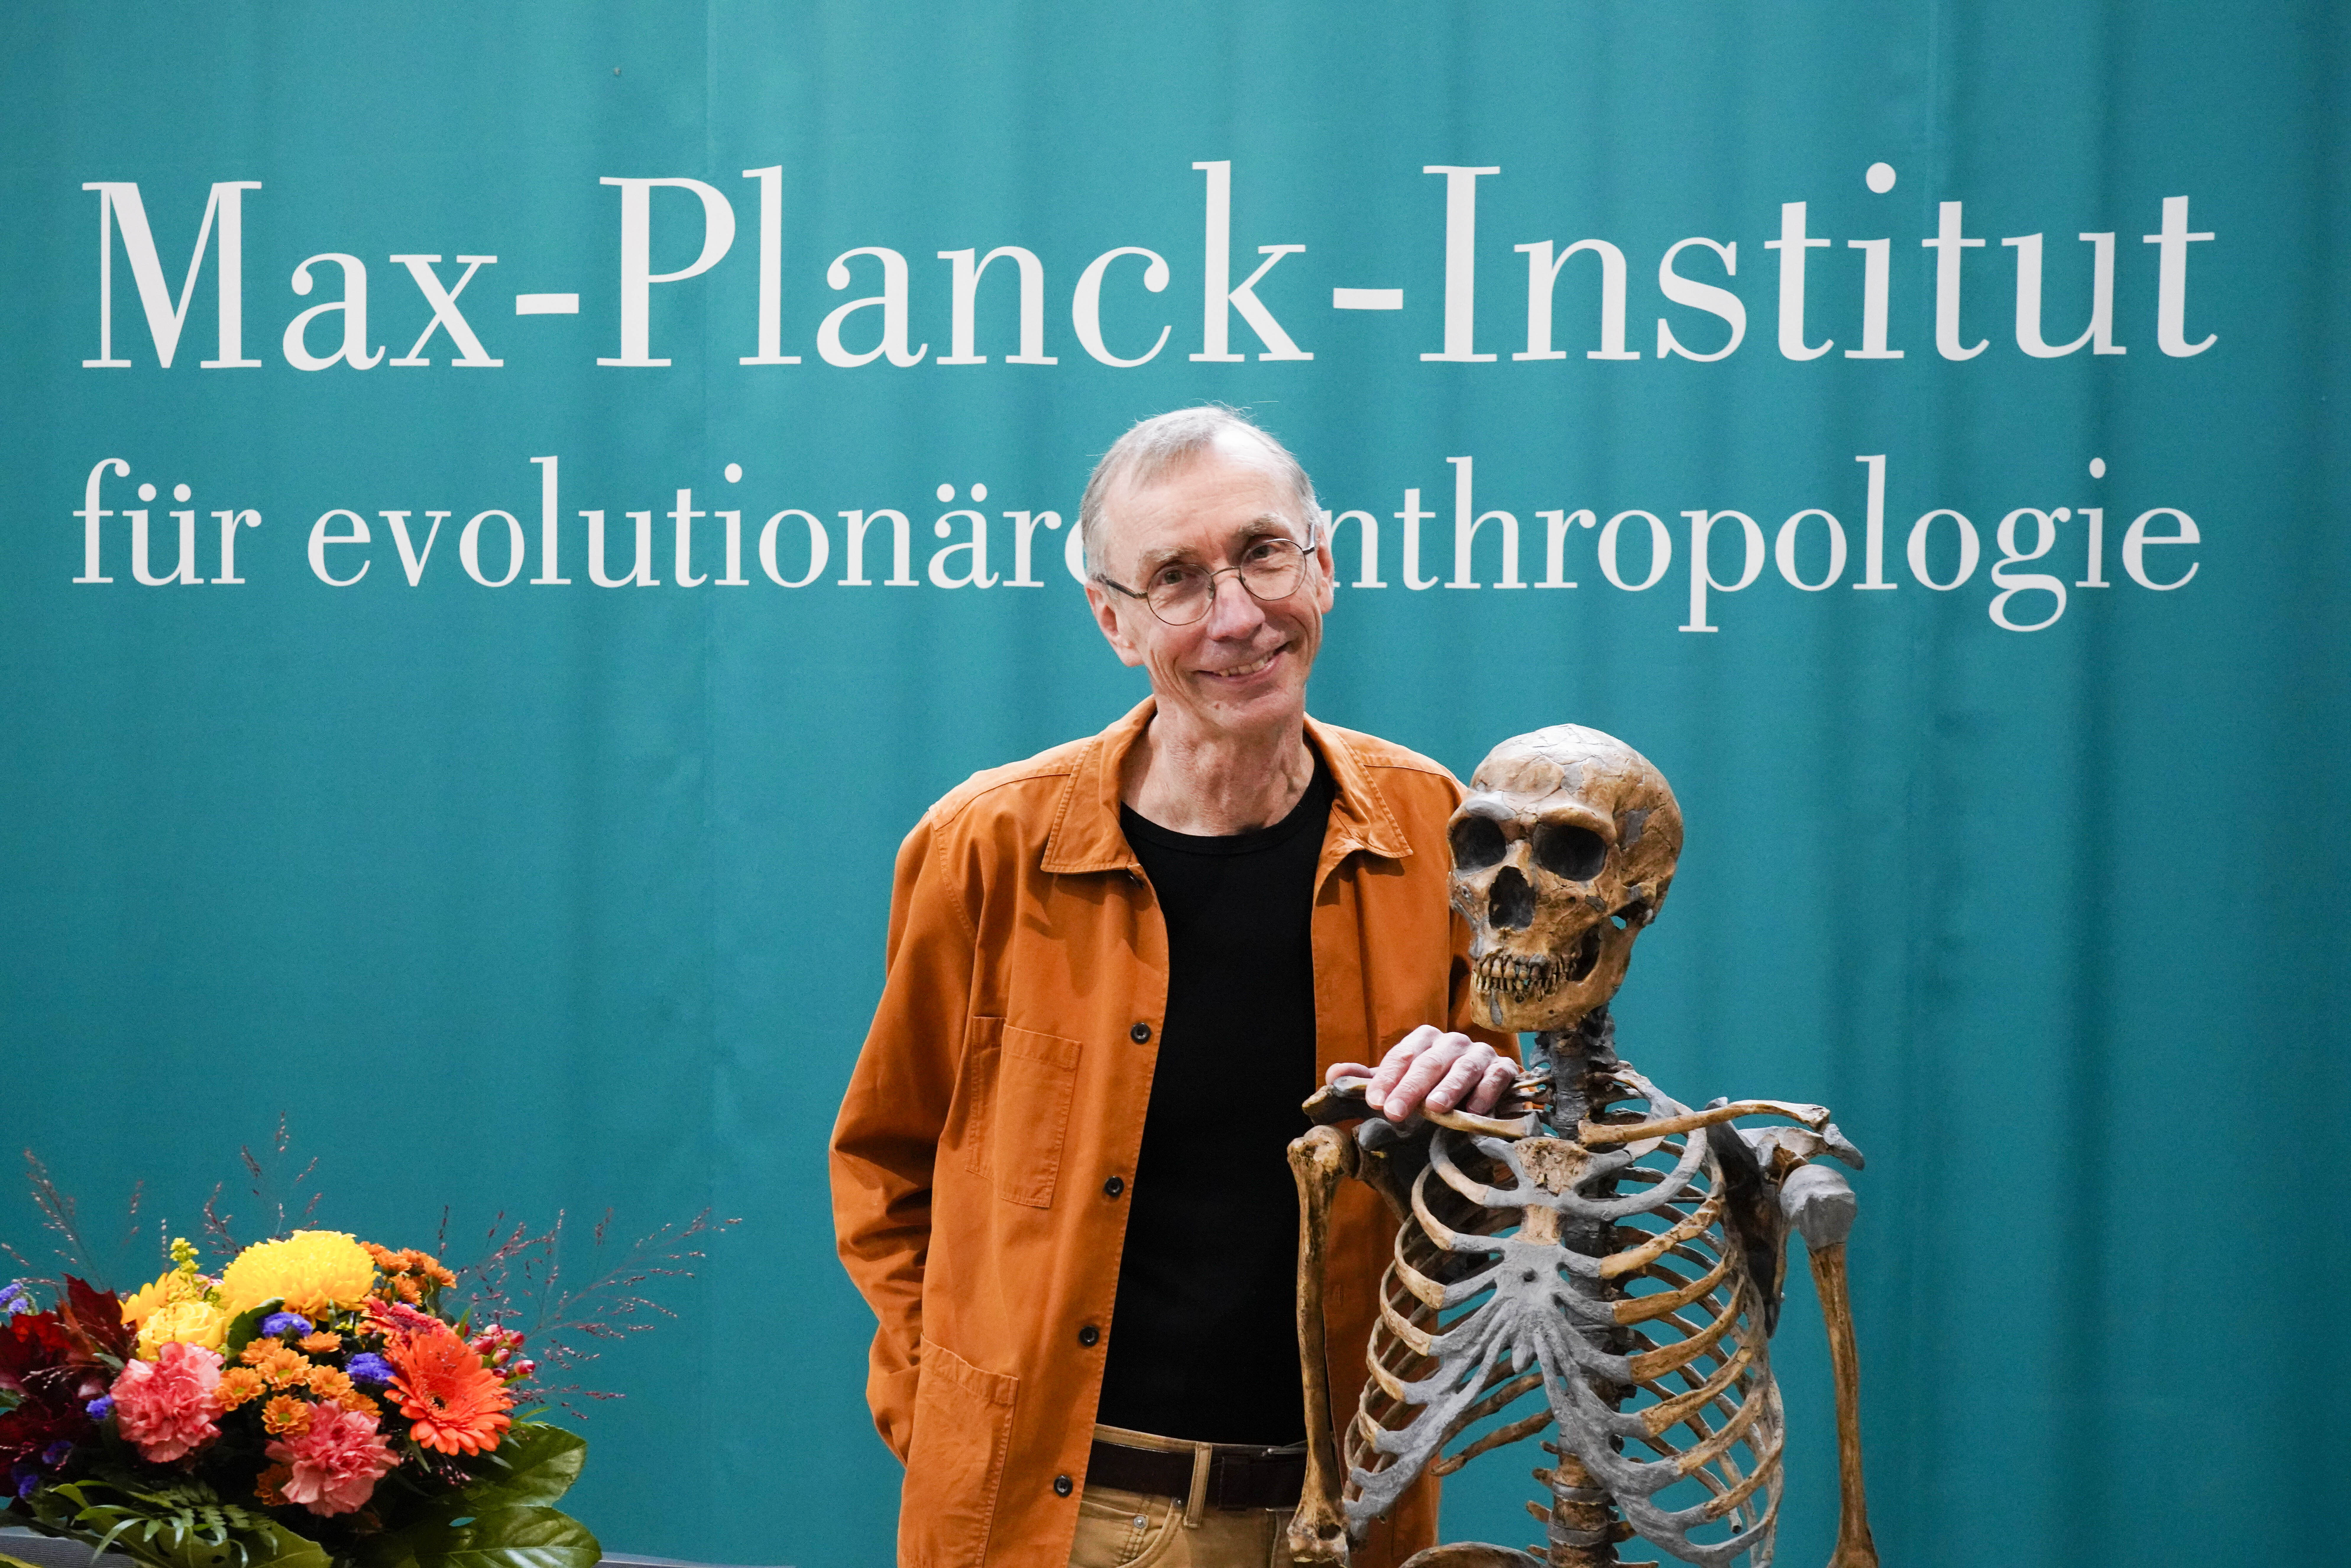 Swedish scientist Svante Paabo poses prior to a news conference at the Max Planck Institute for Evolutionary Anthropology in Leibzig, Germany, Monday, Oct. 3, 2022. Svante Paabo won the Nobel Prize in medicine for his discoveries on human evolution that provided key insights into our immune system and what makes us unique compared with our extinct cousins (AP Photo/Thomas Dietze)